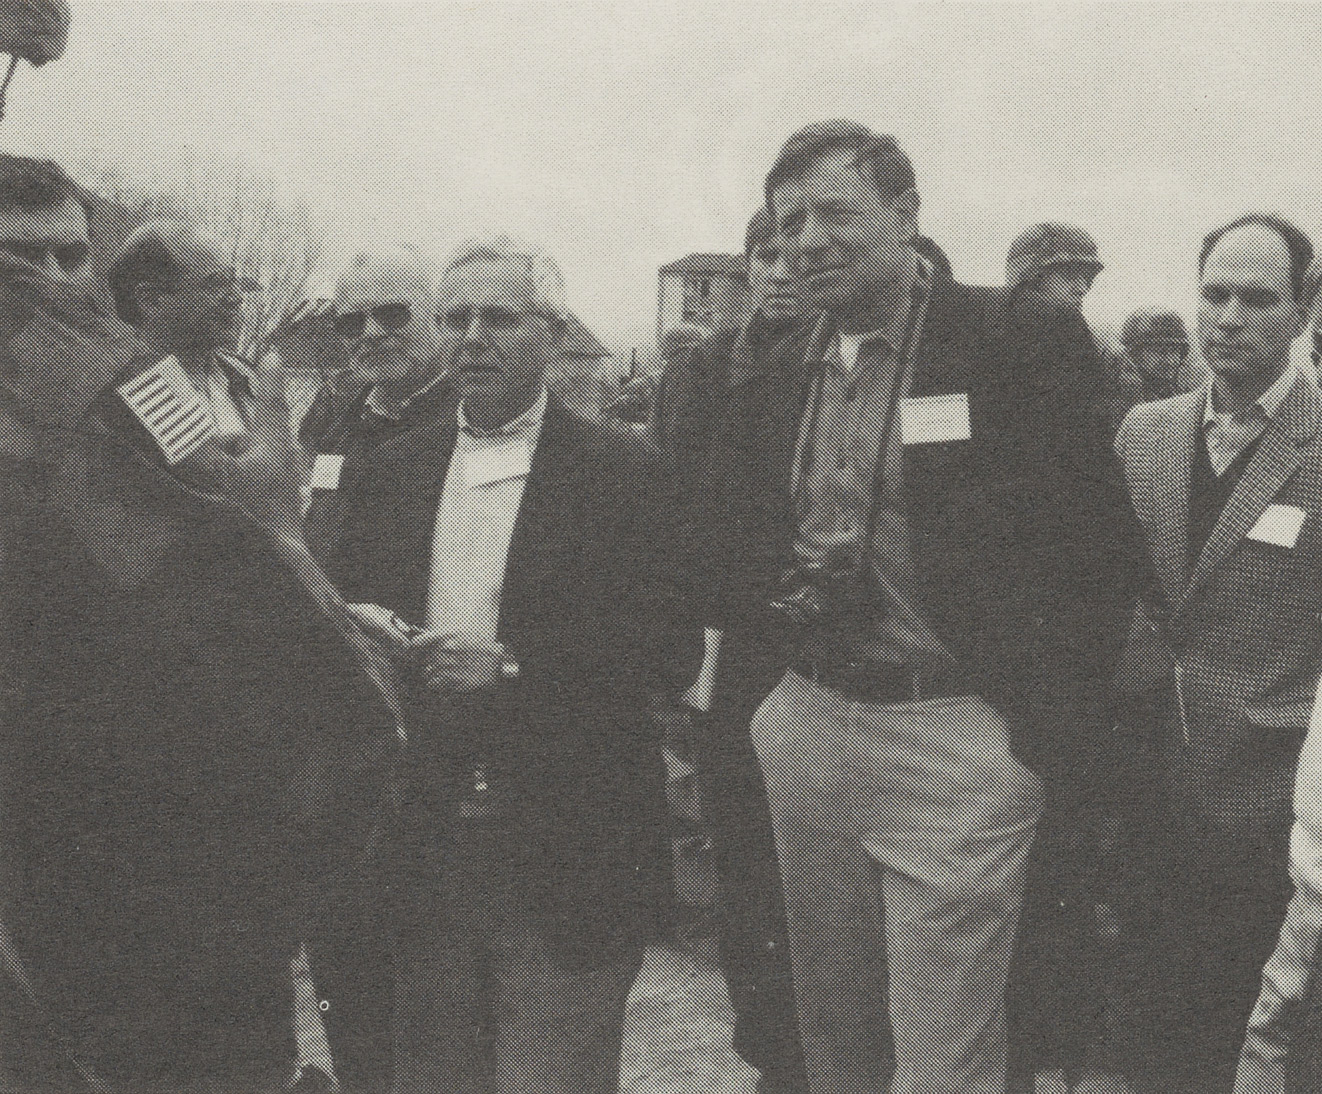 Claudio standing with a group in Tuzla, Bosnia, April 3, 1996.